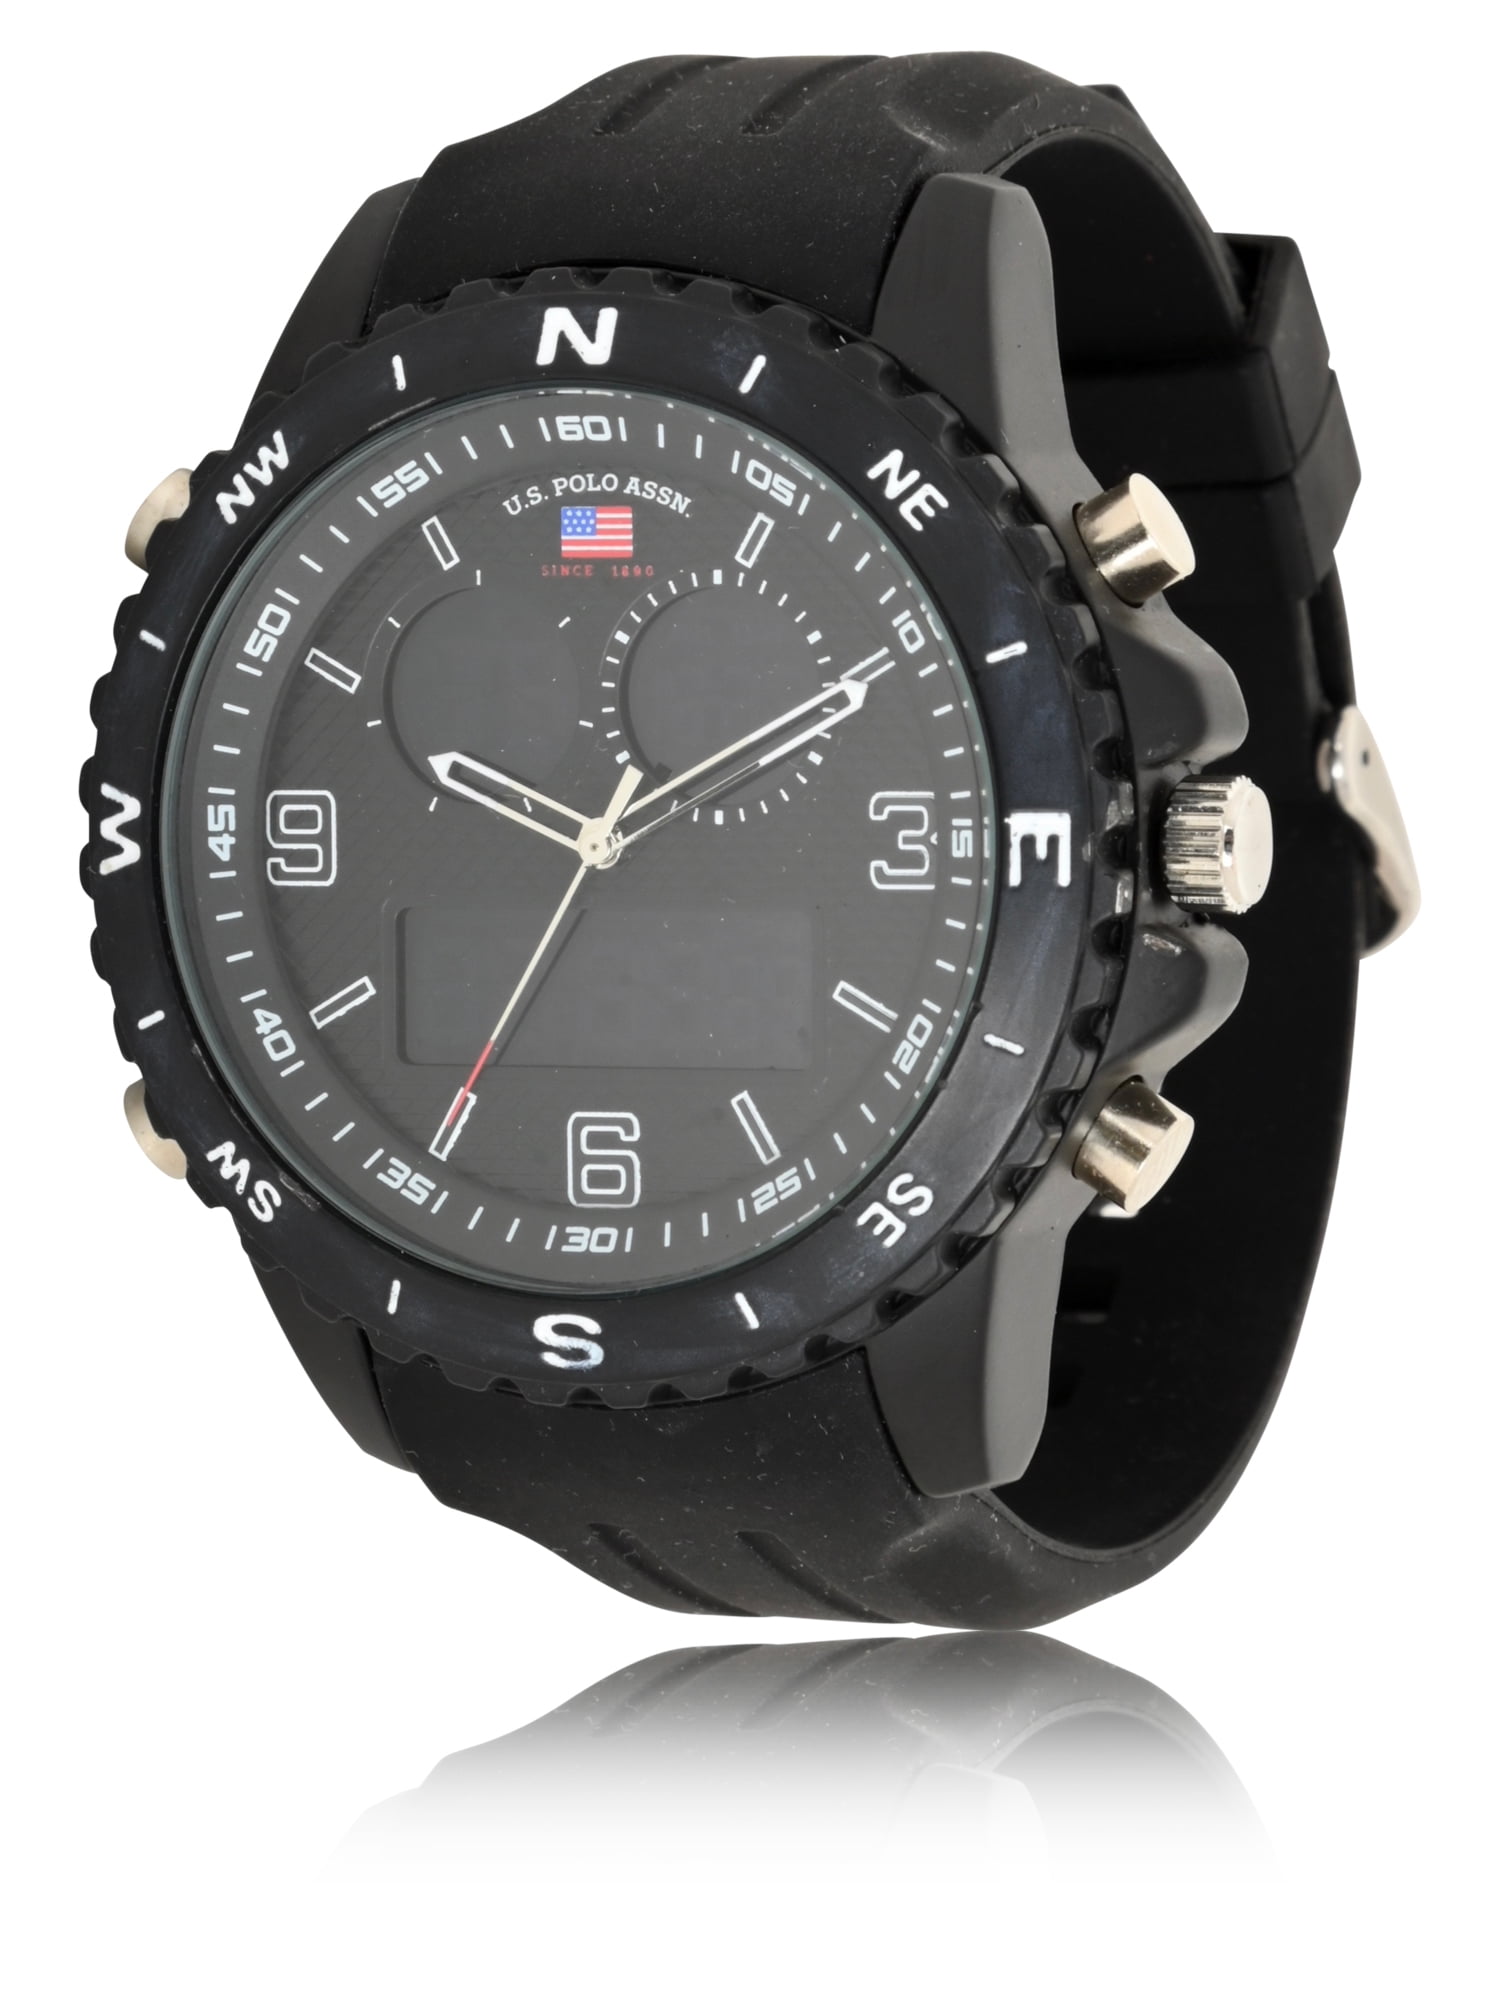 U.S. Polo Assn. Adult Mens Analog Watch with Black Rubber Strap ...